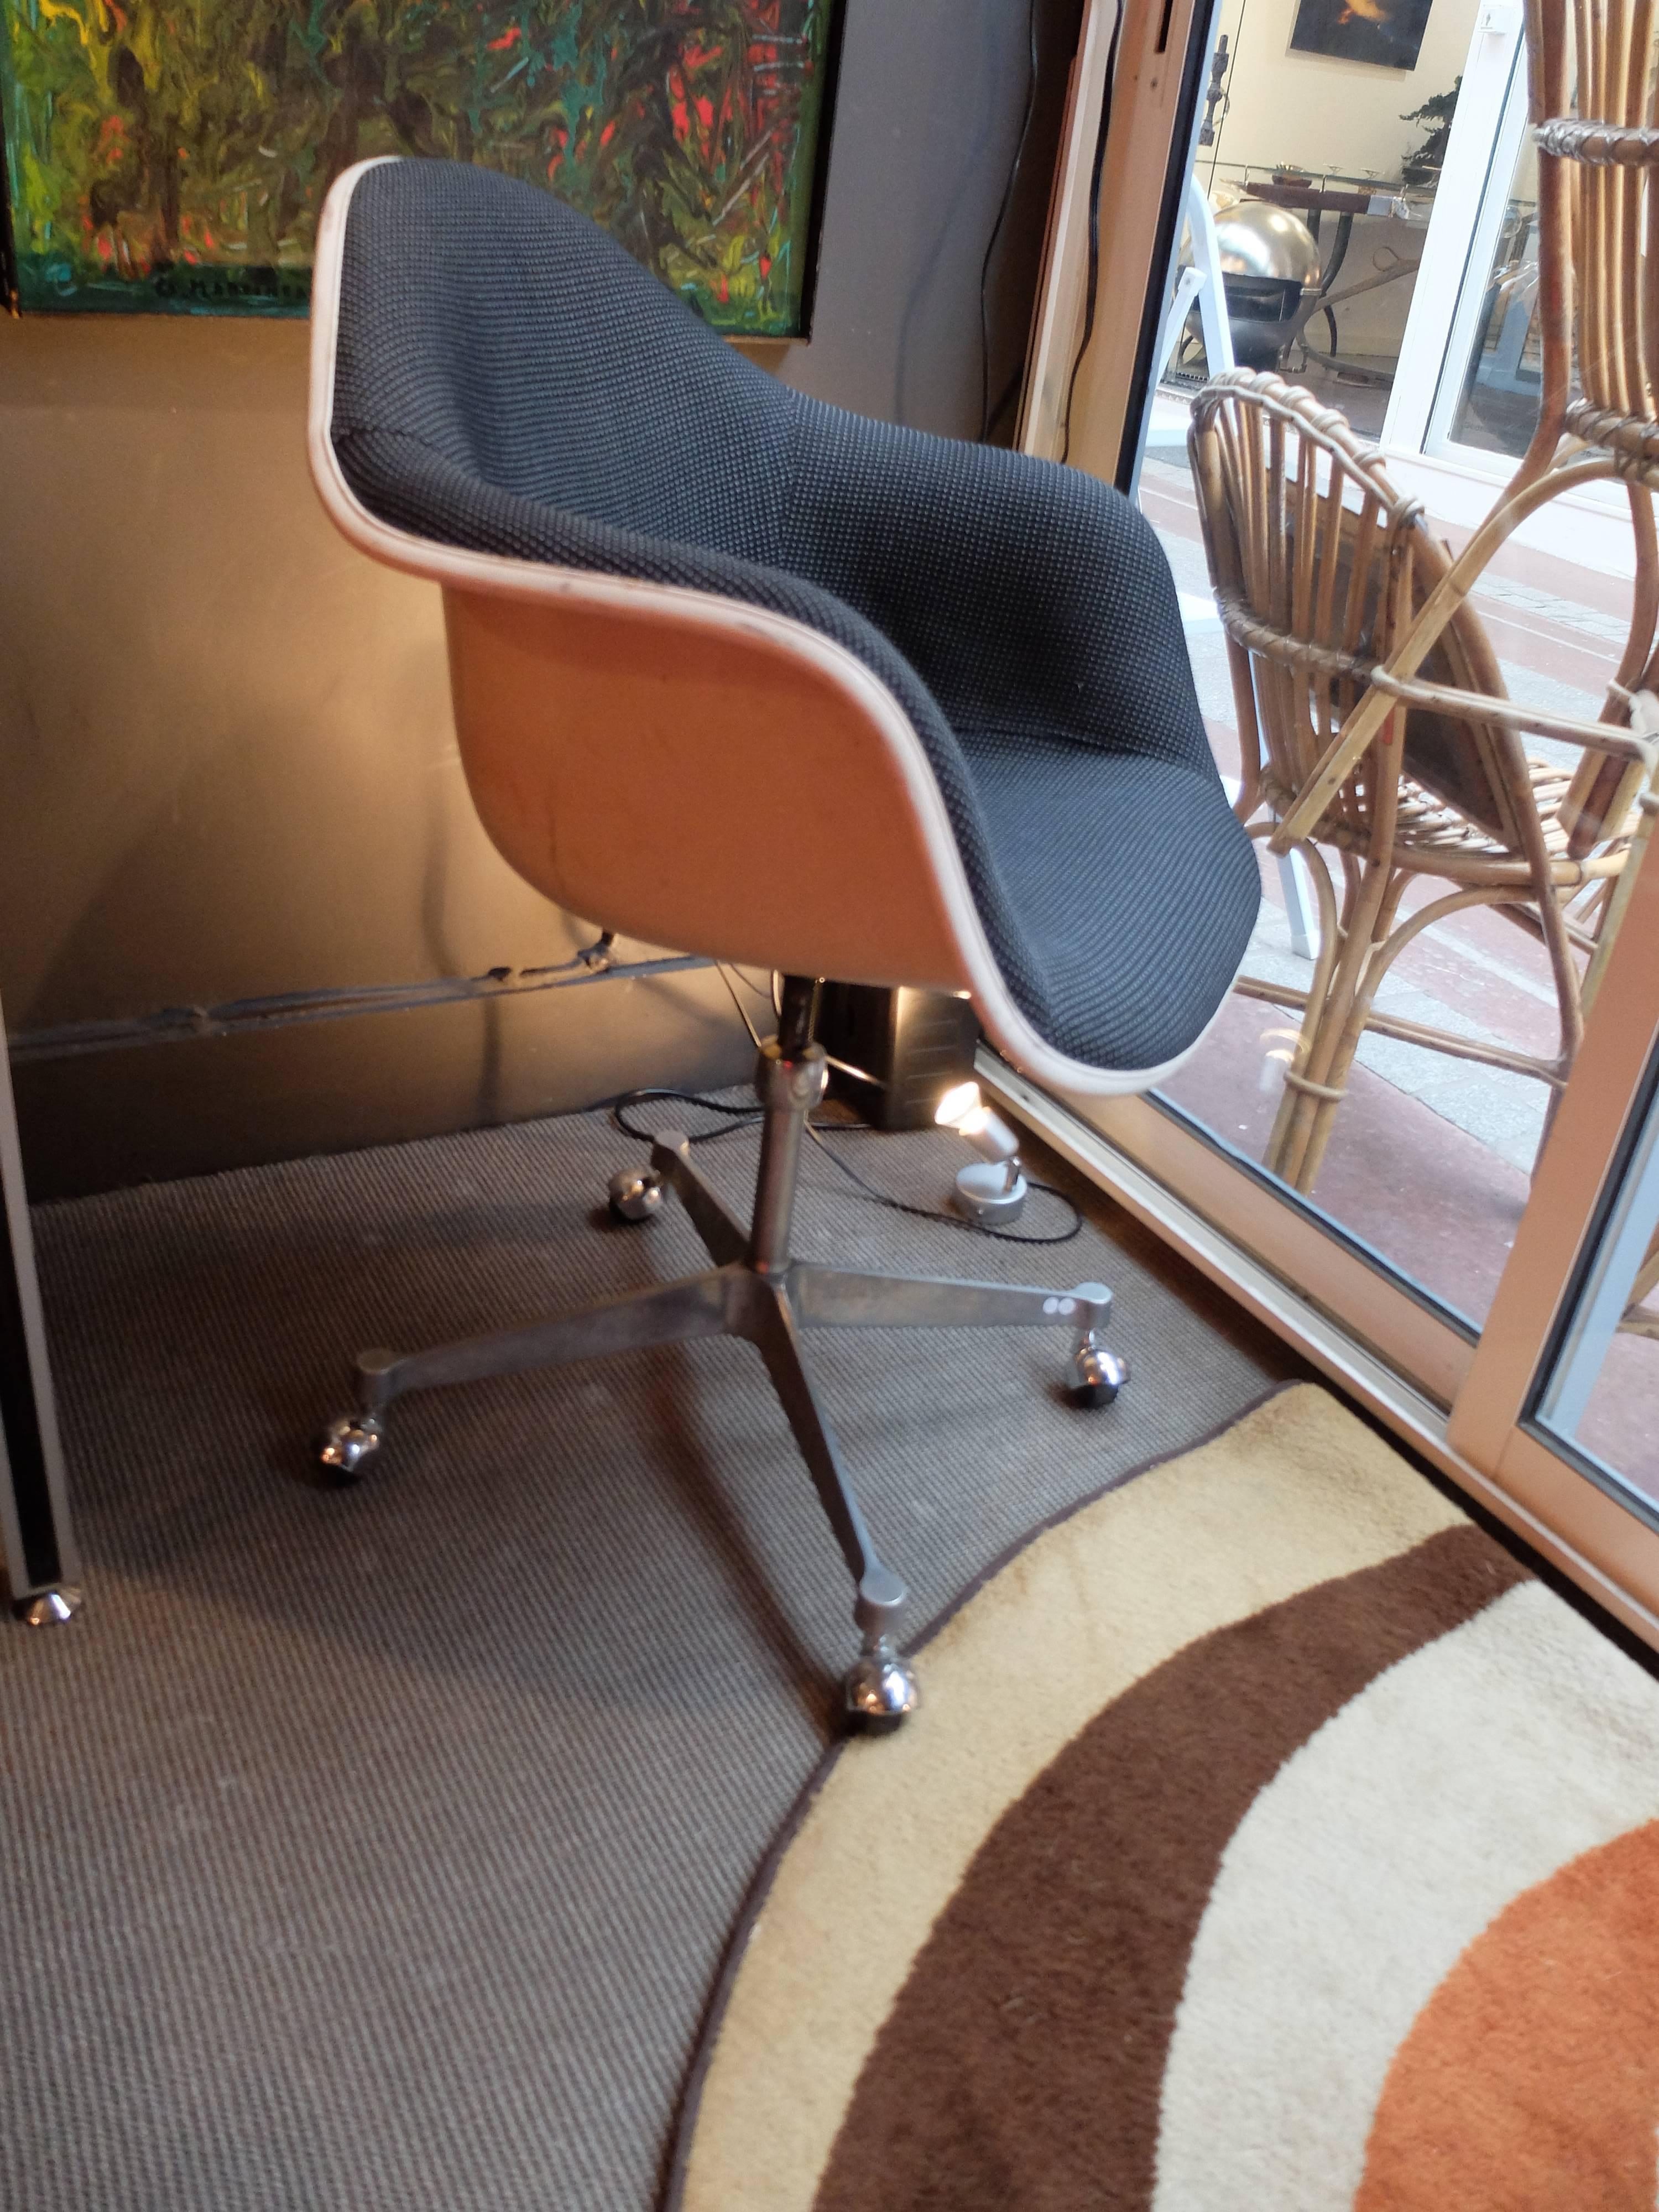 A Rare early 70's deskchair on casters, made in France, in perfect condtion, The swivel shell is made of genuine fibreglass, newly relined with high quality fabric, Cast aluminium feet with chrome casters.all casters are in impeccable condition,